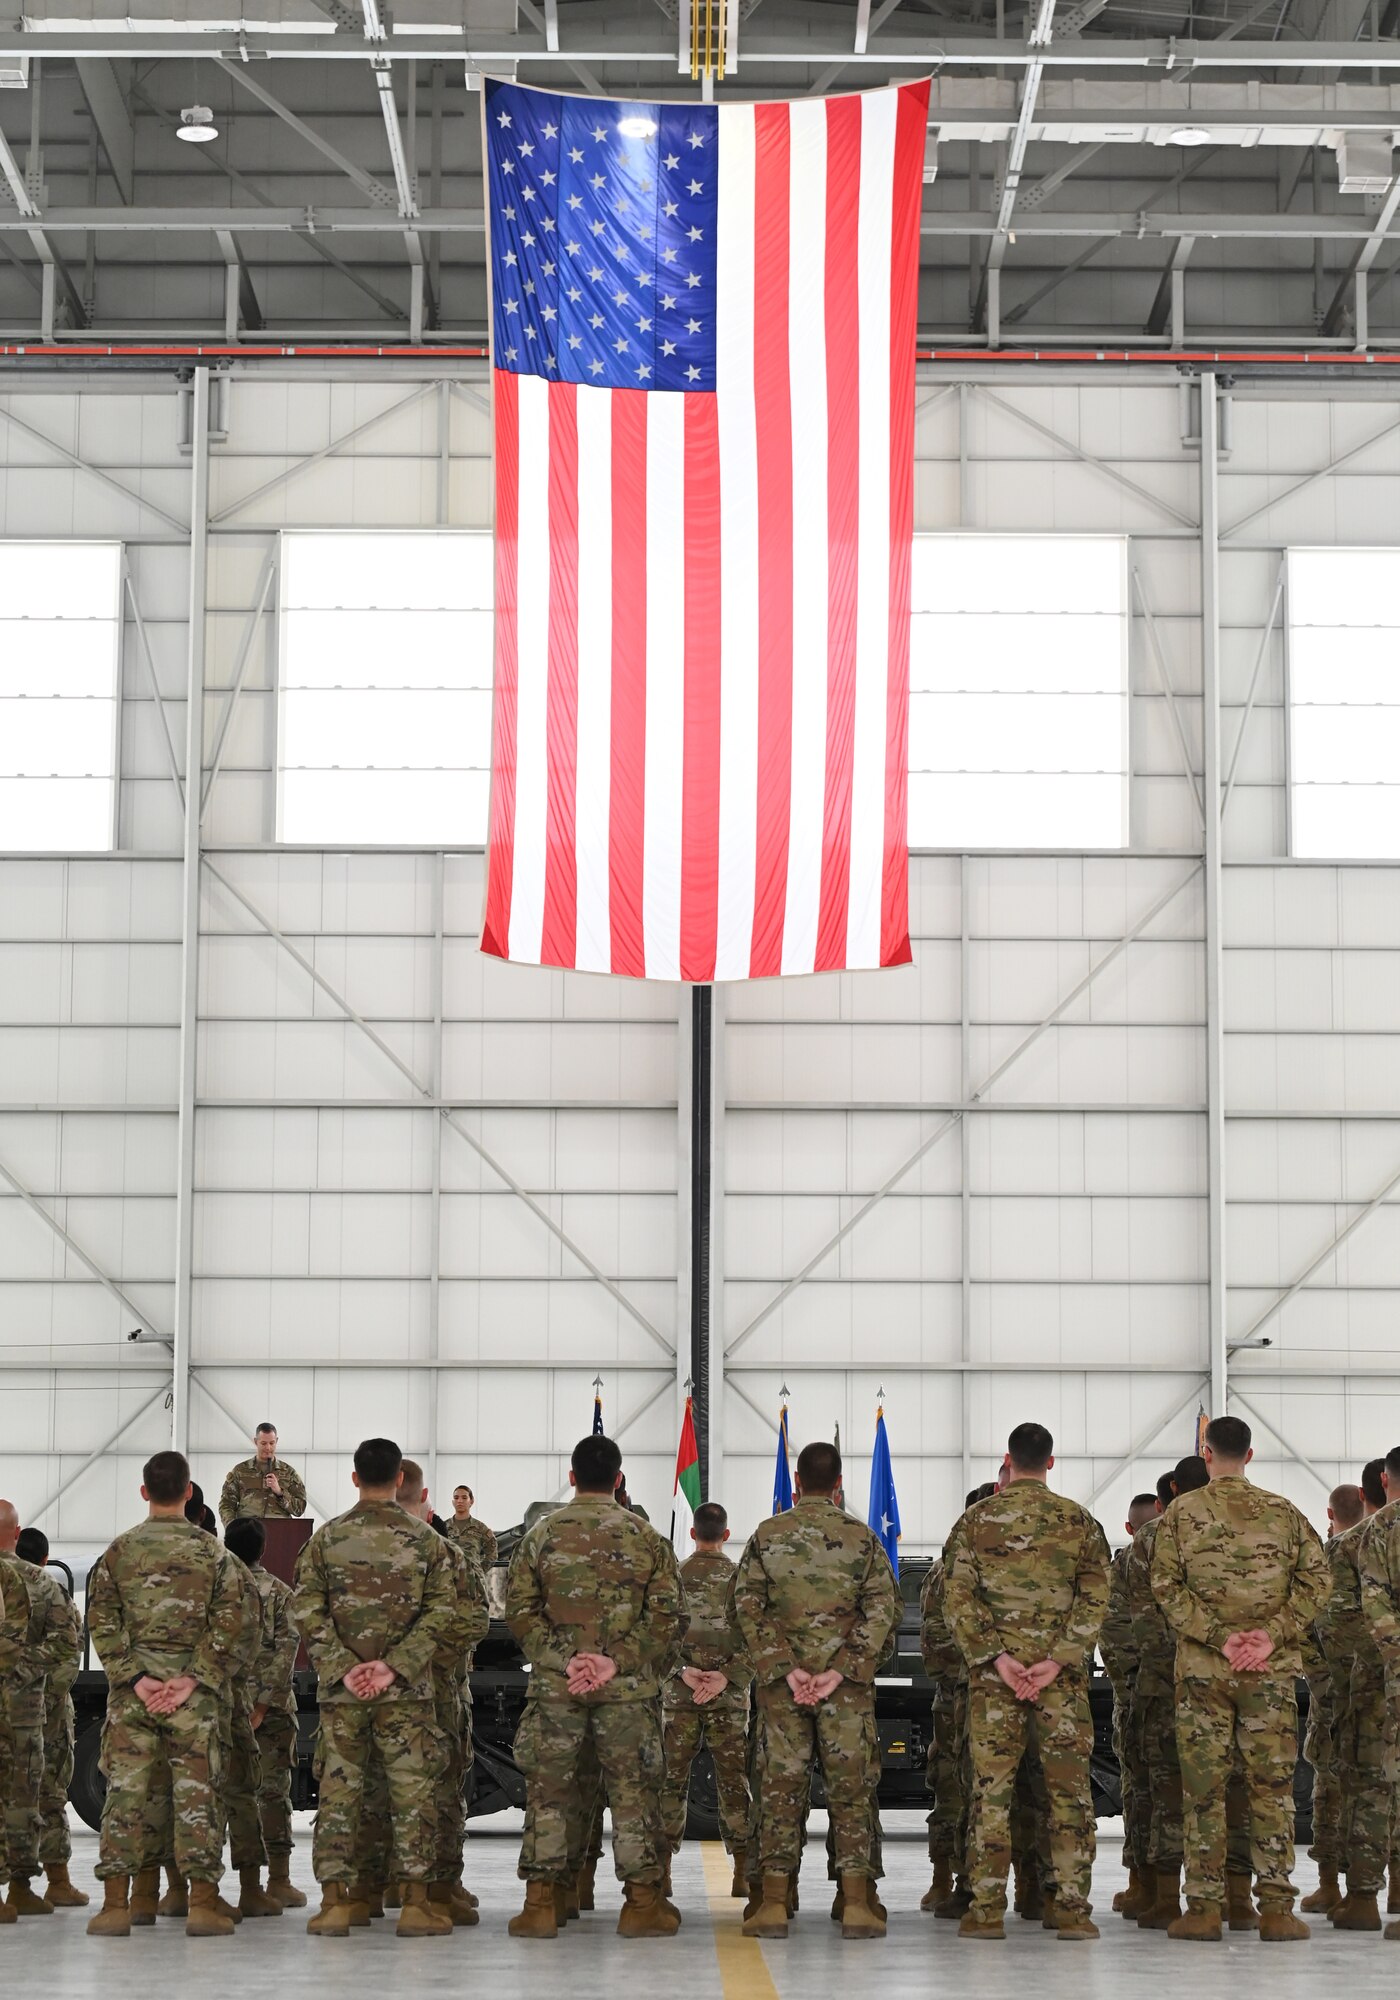 A photo of people standing in formation with a flag in the background.